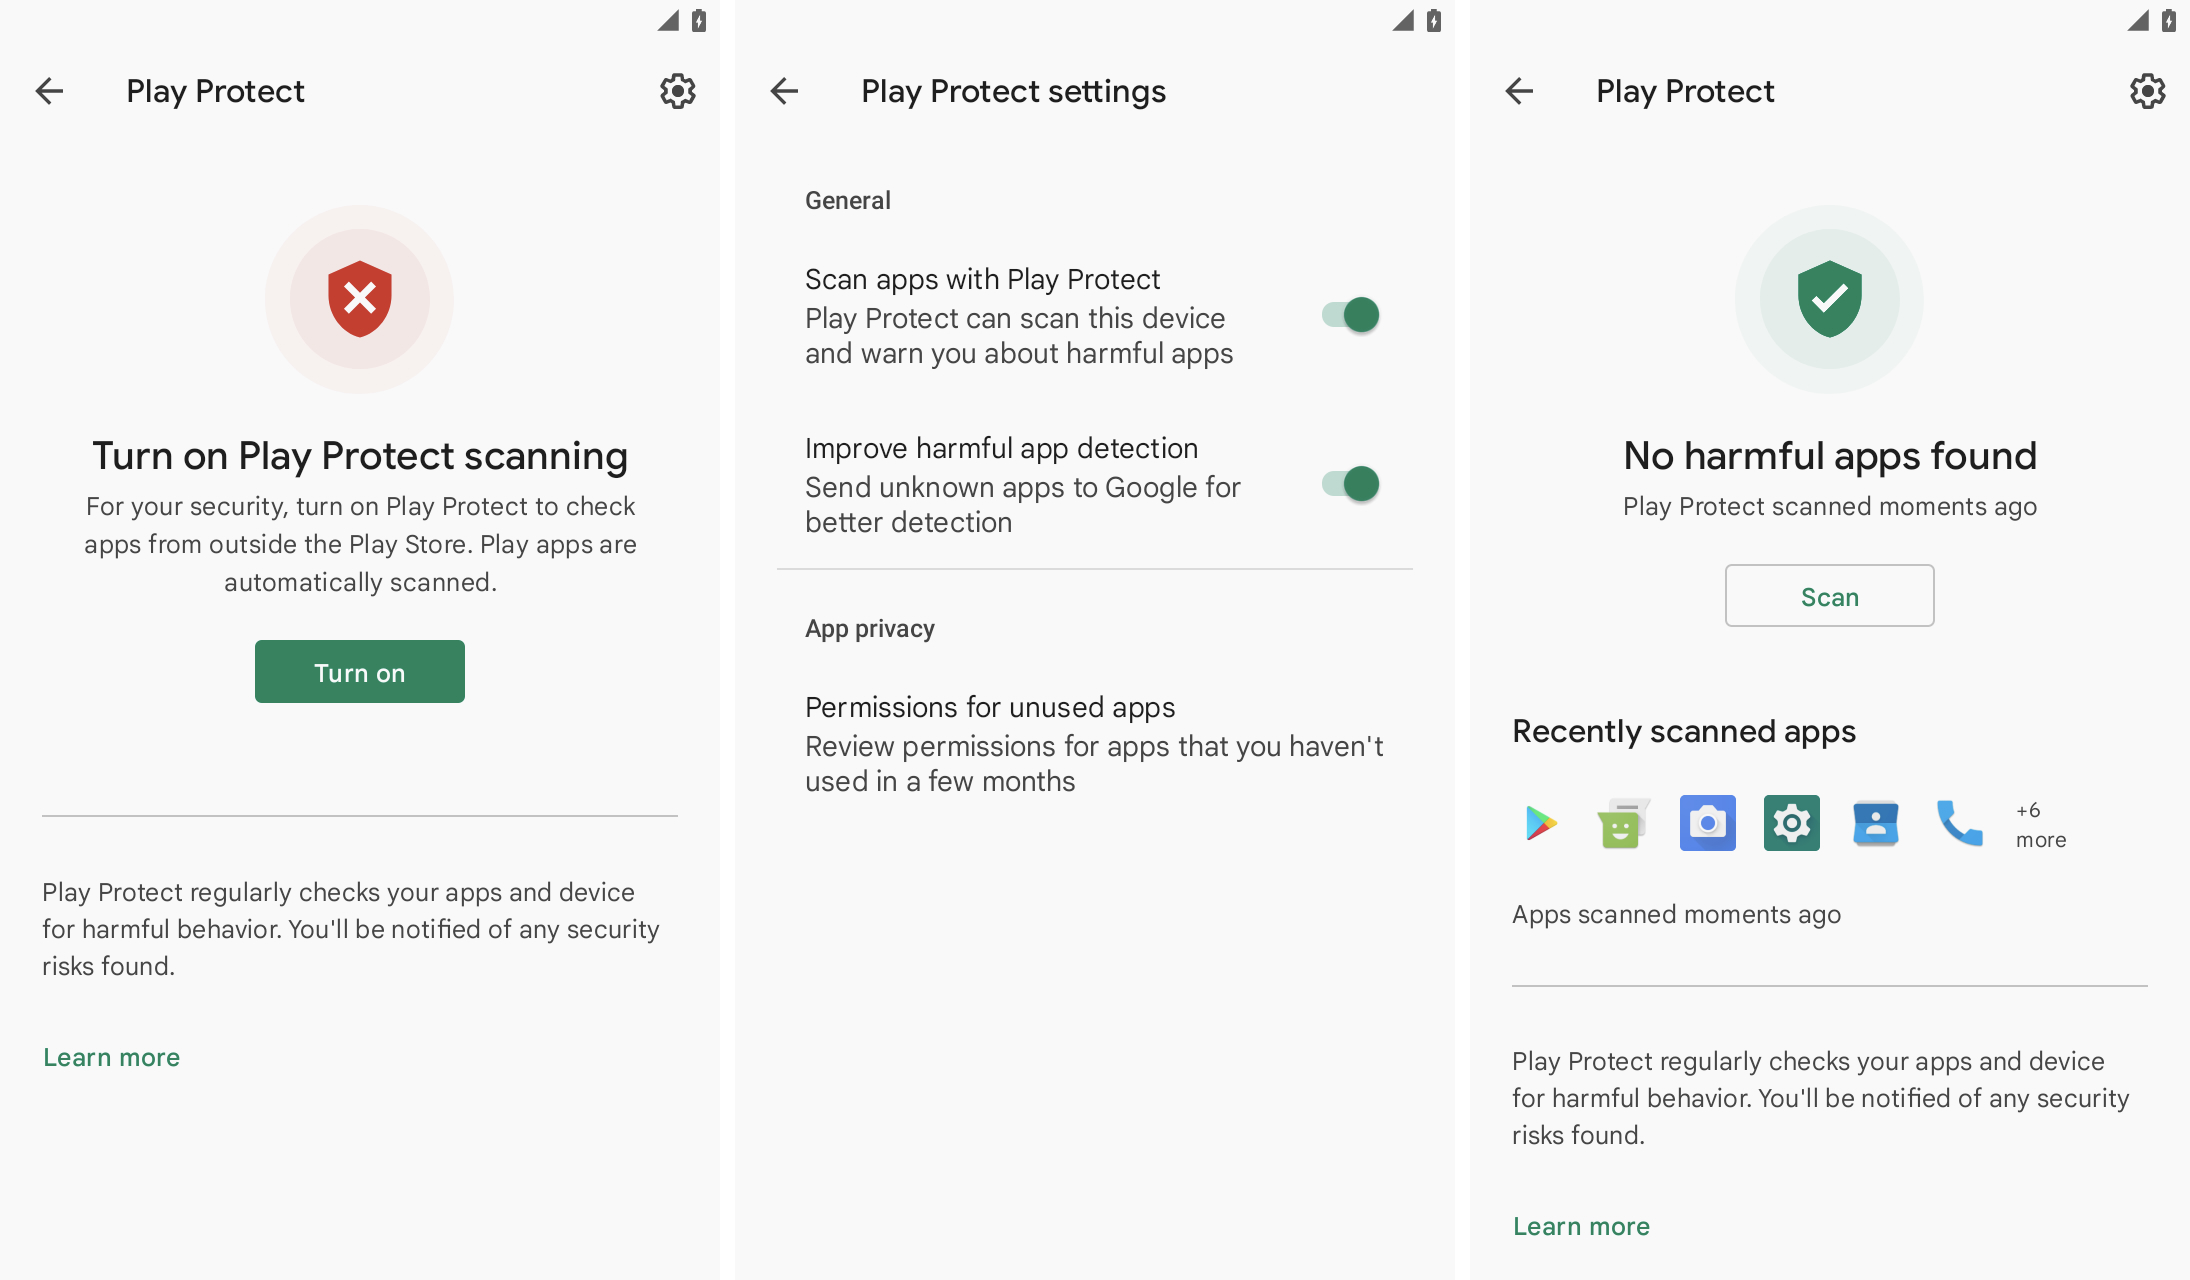 Three side-by-side screenshots showing Play Protect with scanning turned off and Protect Play Protect settings with all toggles turned on.  The third screenshot shows Google Play Protect enabled. "No harmful apps were found." featuring "scan" Click the button to check for potentially malicious apps.